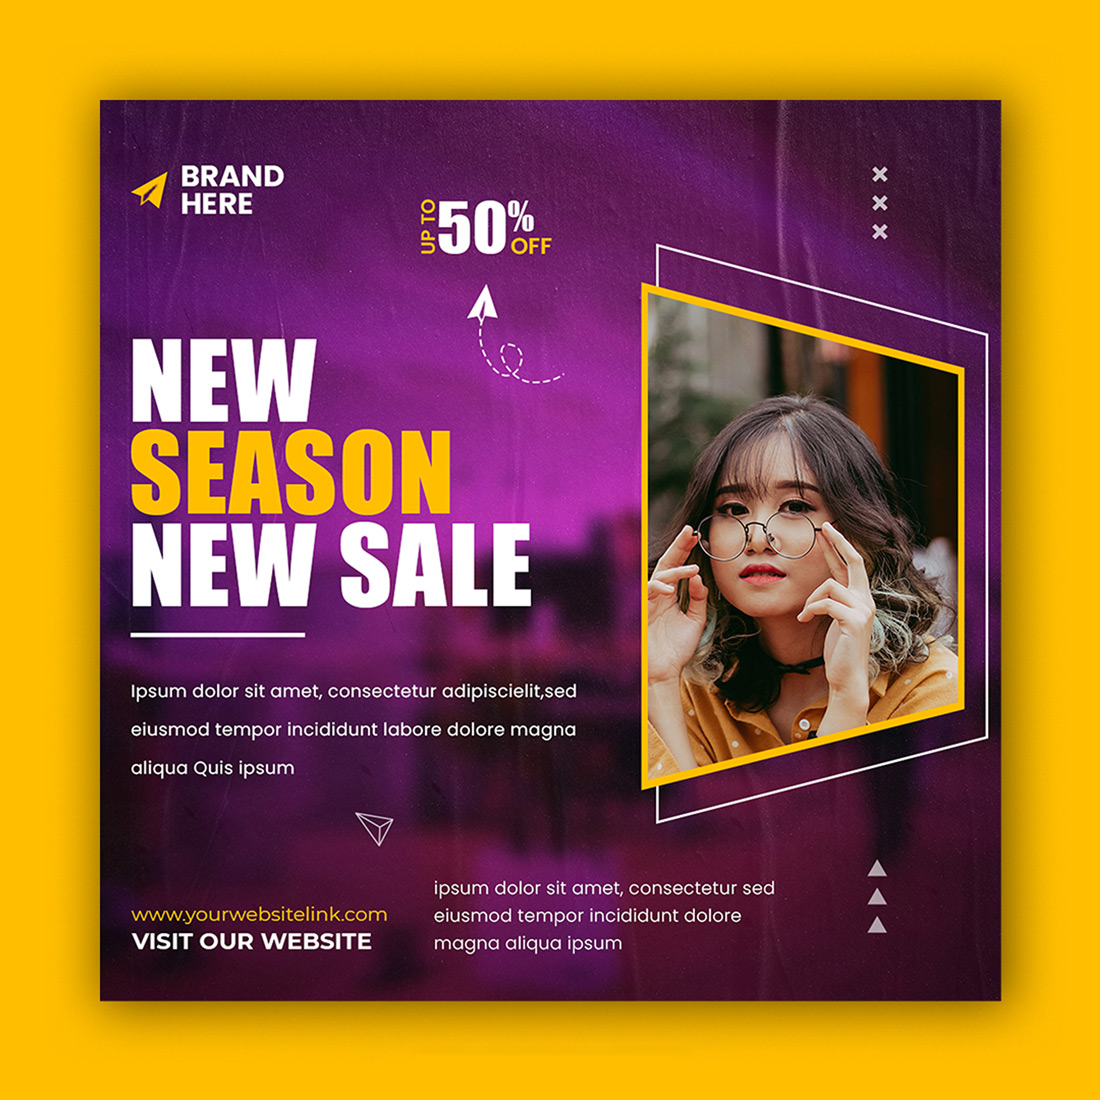 Purple and yellow flyer for a new season sale.